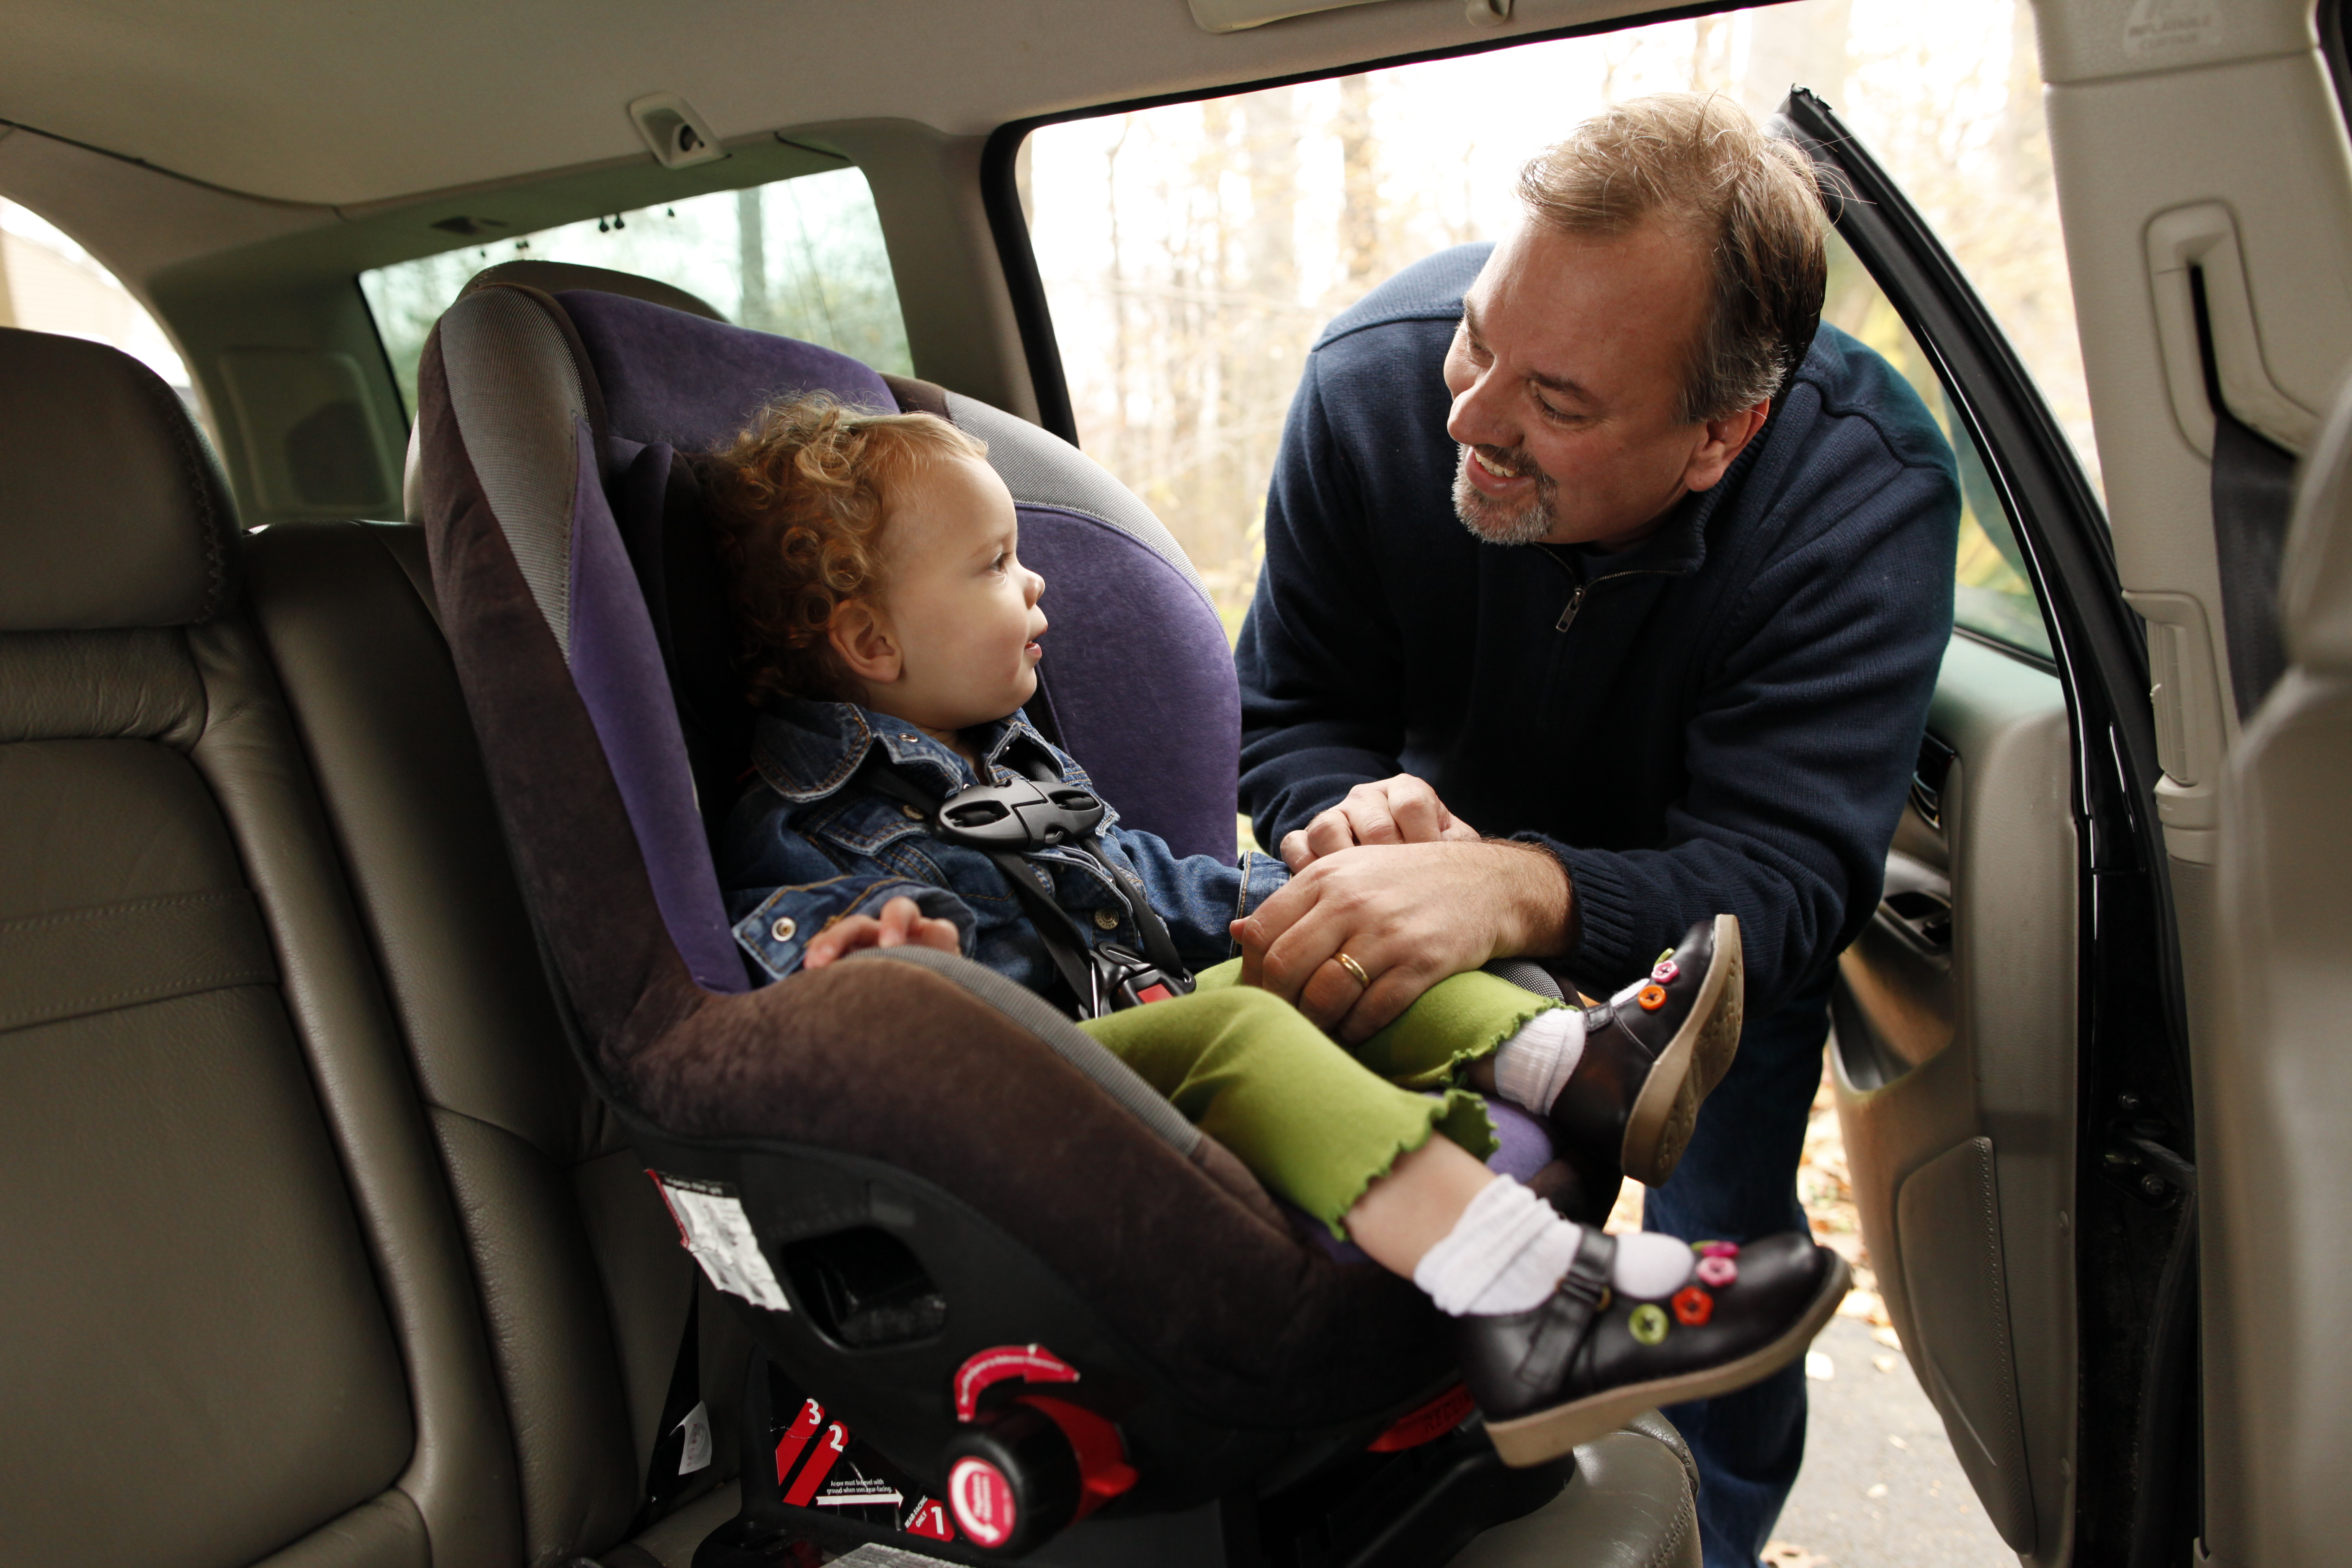 White father latches child's safety car seat